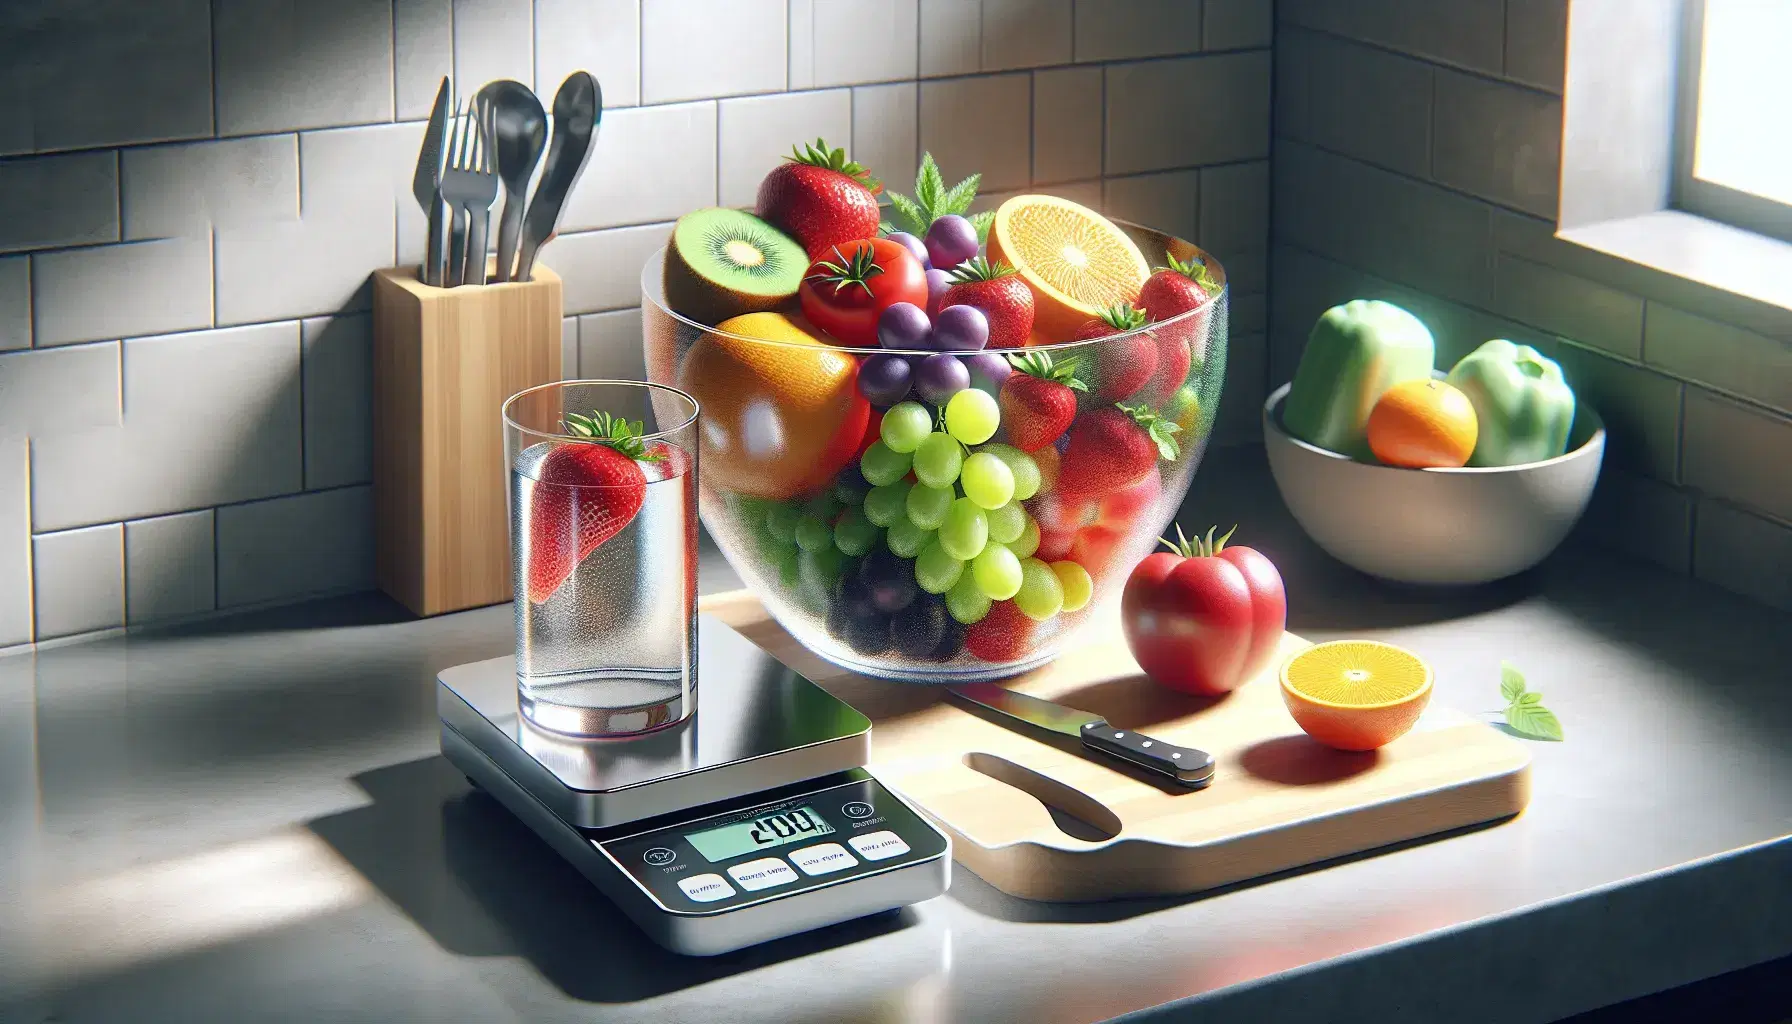 Glass container with fresh fruit, digital scale with tomato, glass of water with ice and cutting board with green pepper and chef knife.